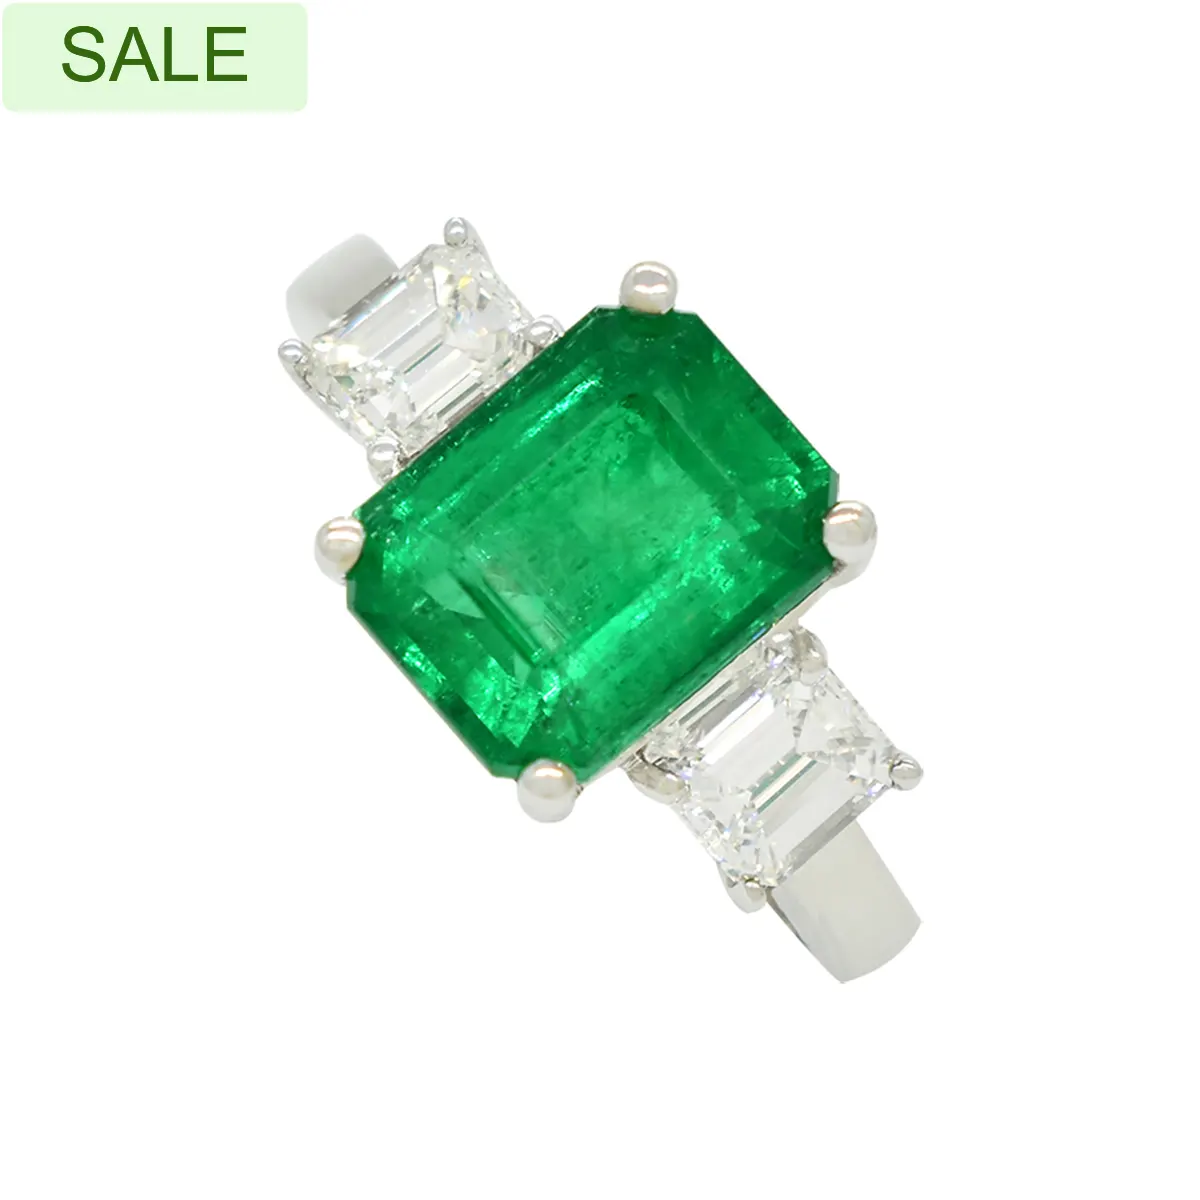 Emerald Ring in 18K White Gold With Emerald Cut Diamonds in 3 Stones Style